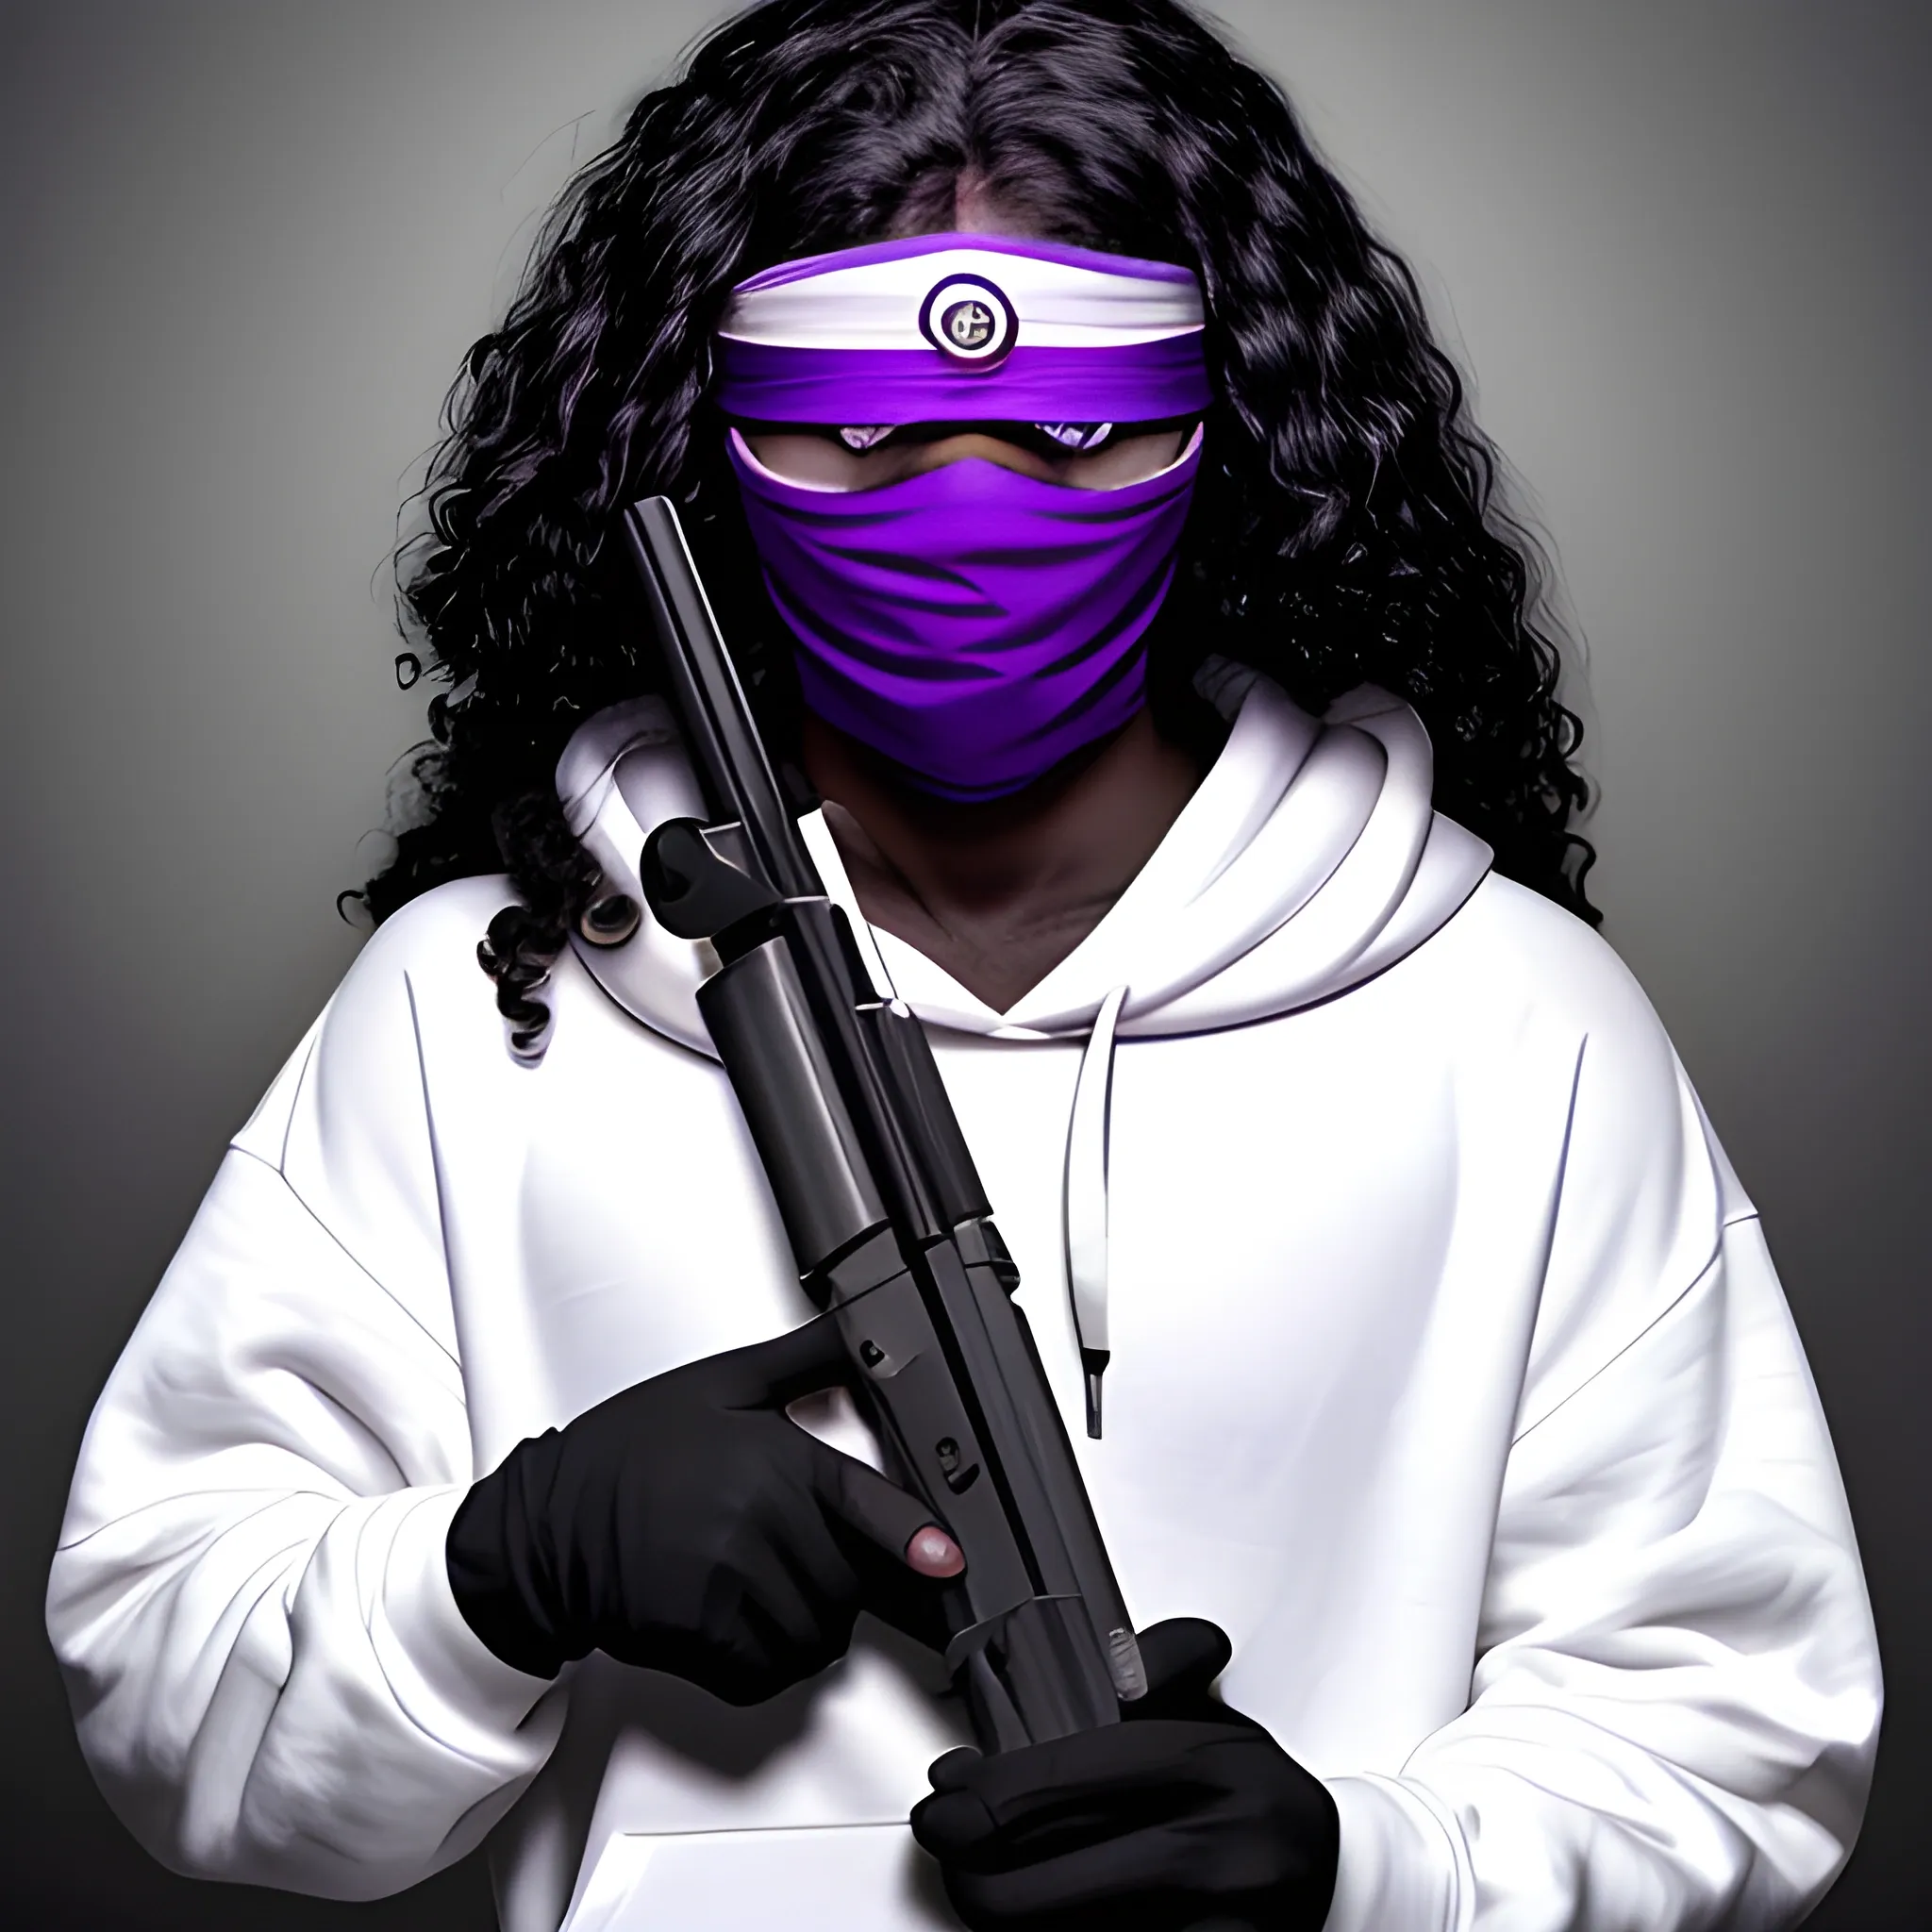 A white man with long black curly hair, with a black blindfold over his eyes on, a white hoodie, black shirt, and a look of fear and betrayal on his face, holding a gun. And a purple light from behind him